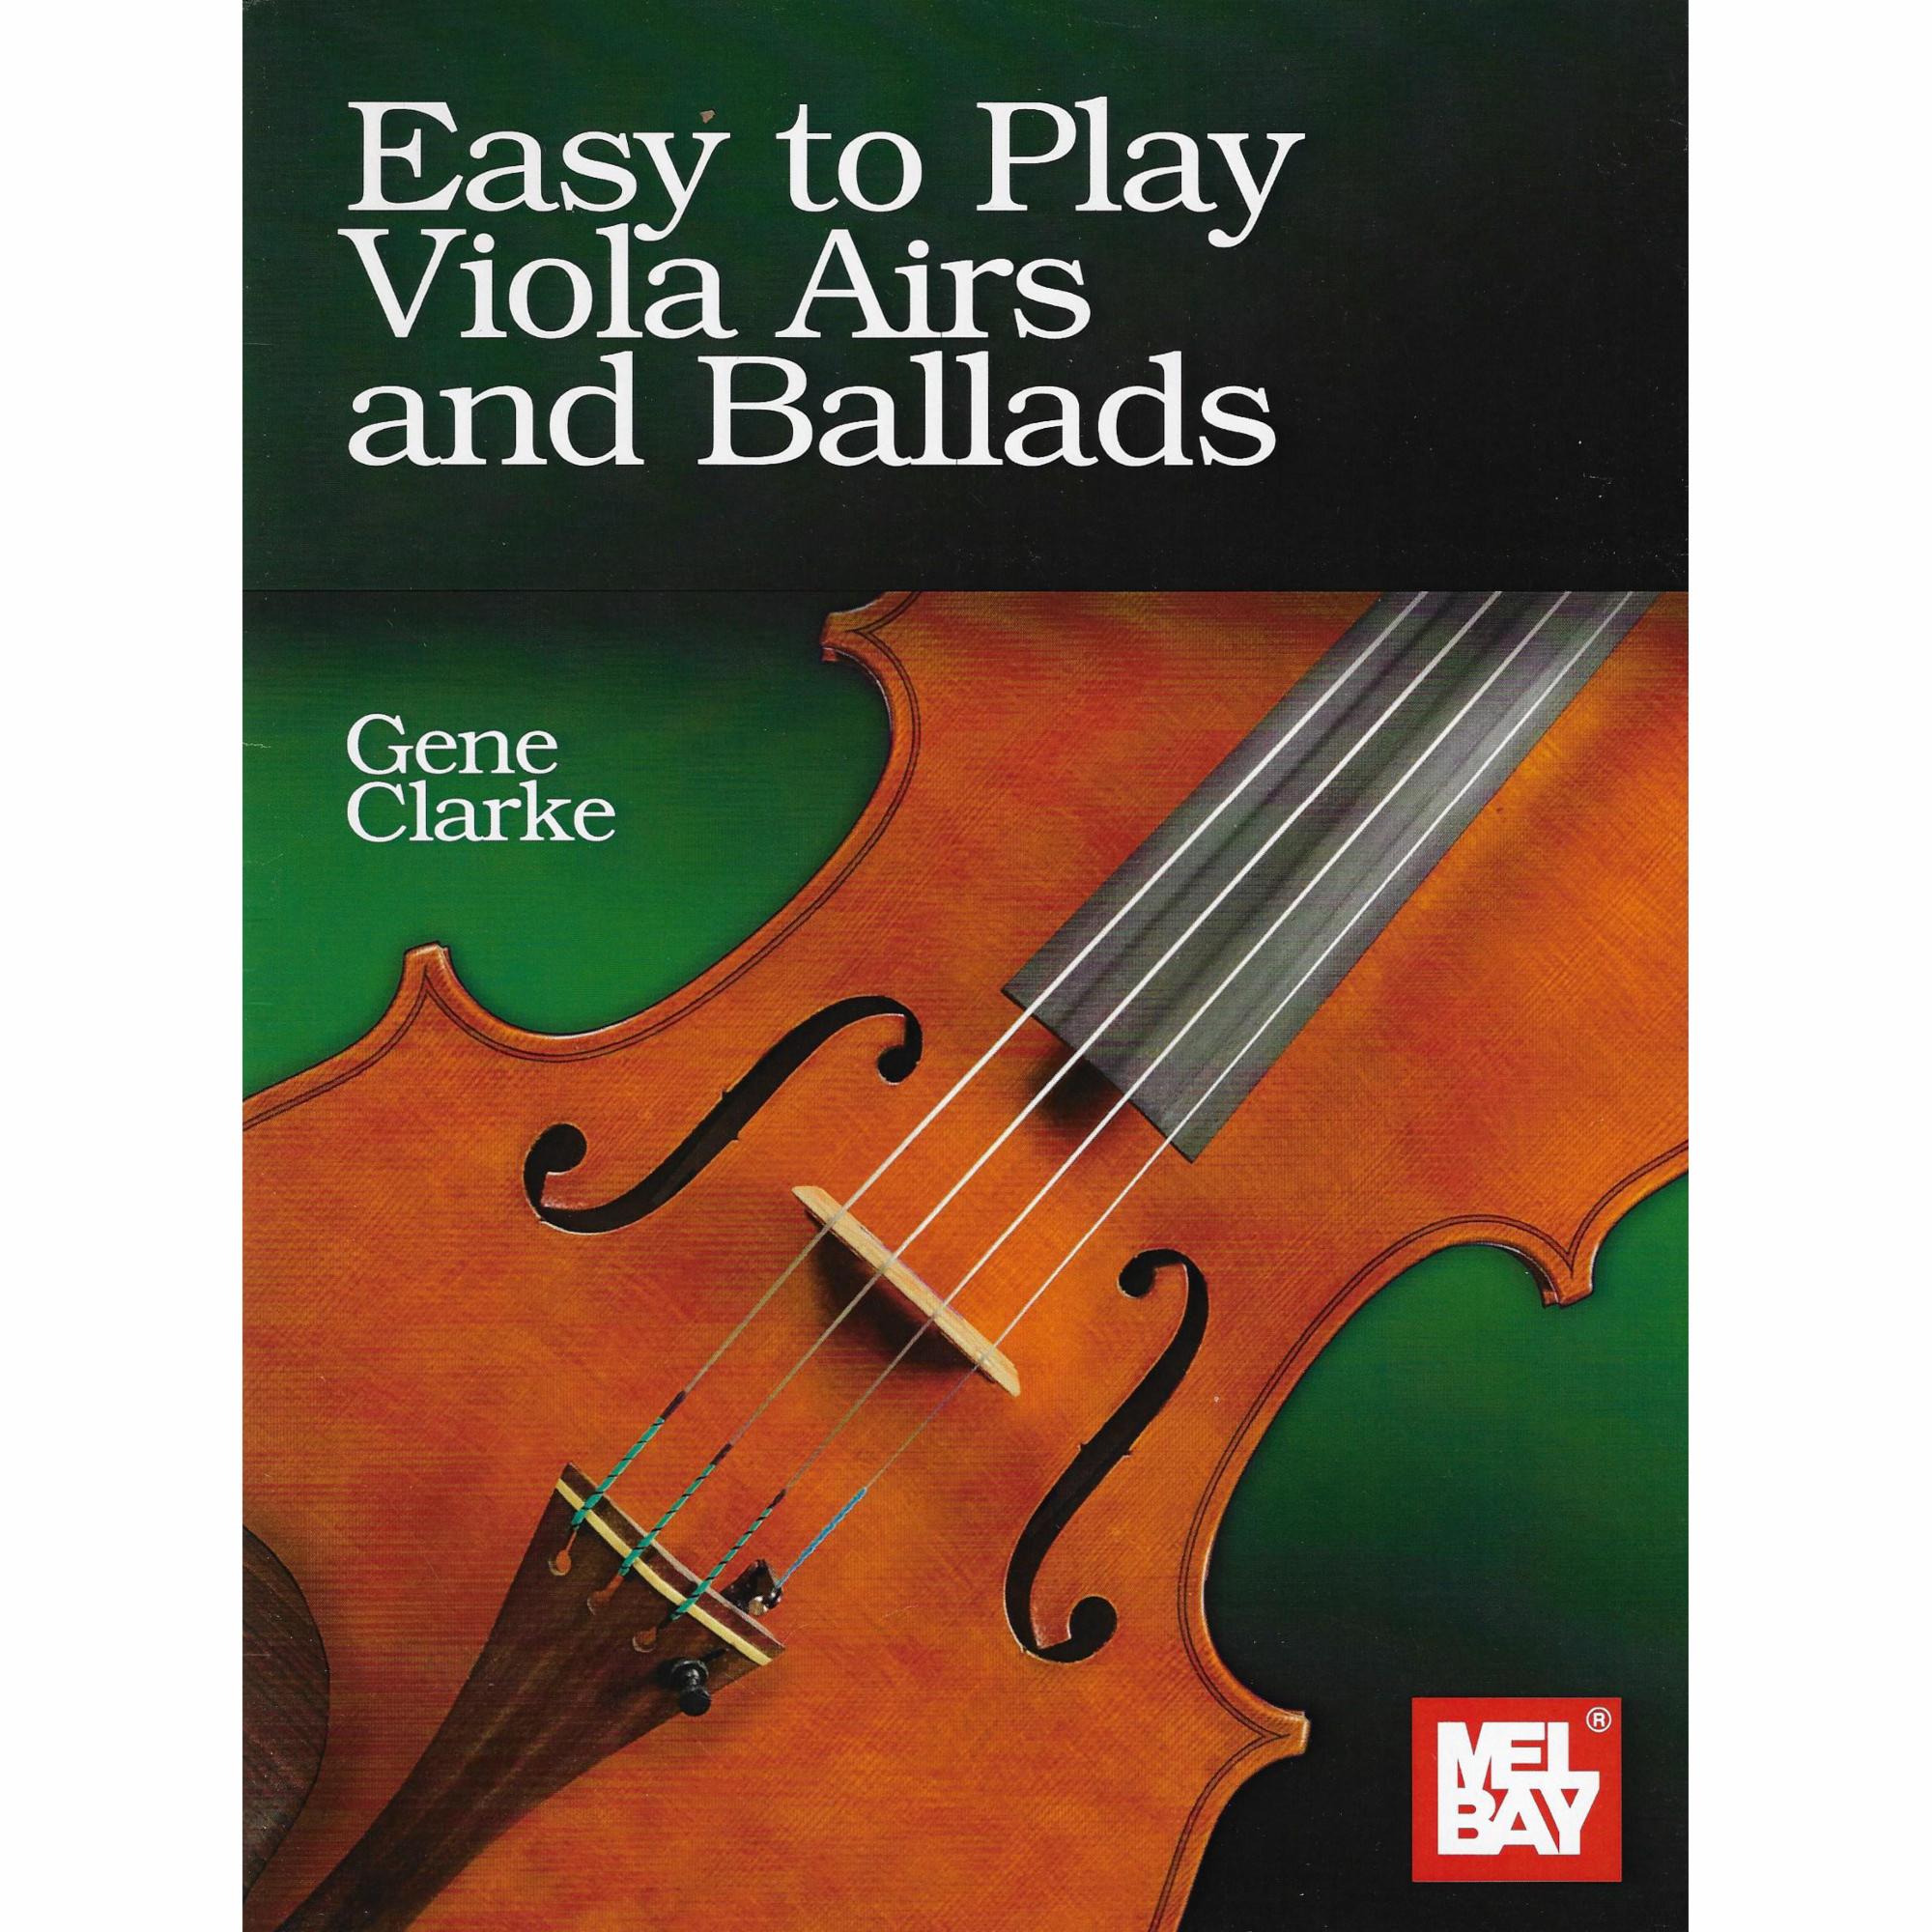 Easy to Play Viola Airs and Ballades